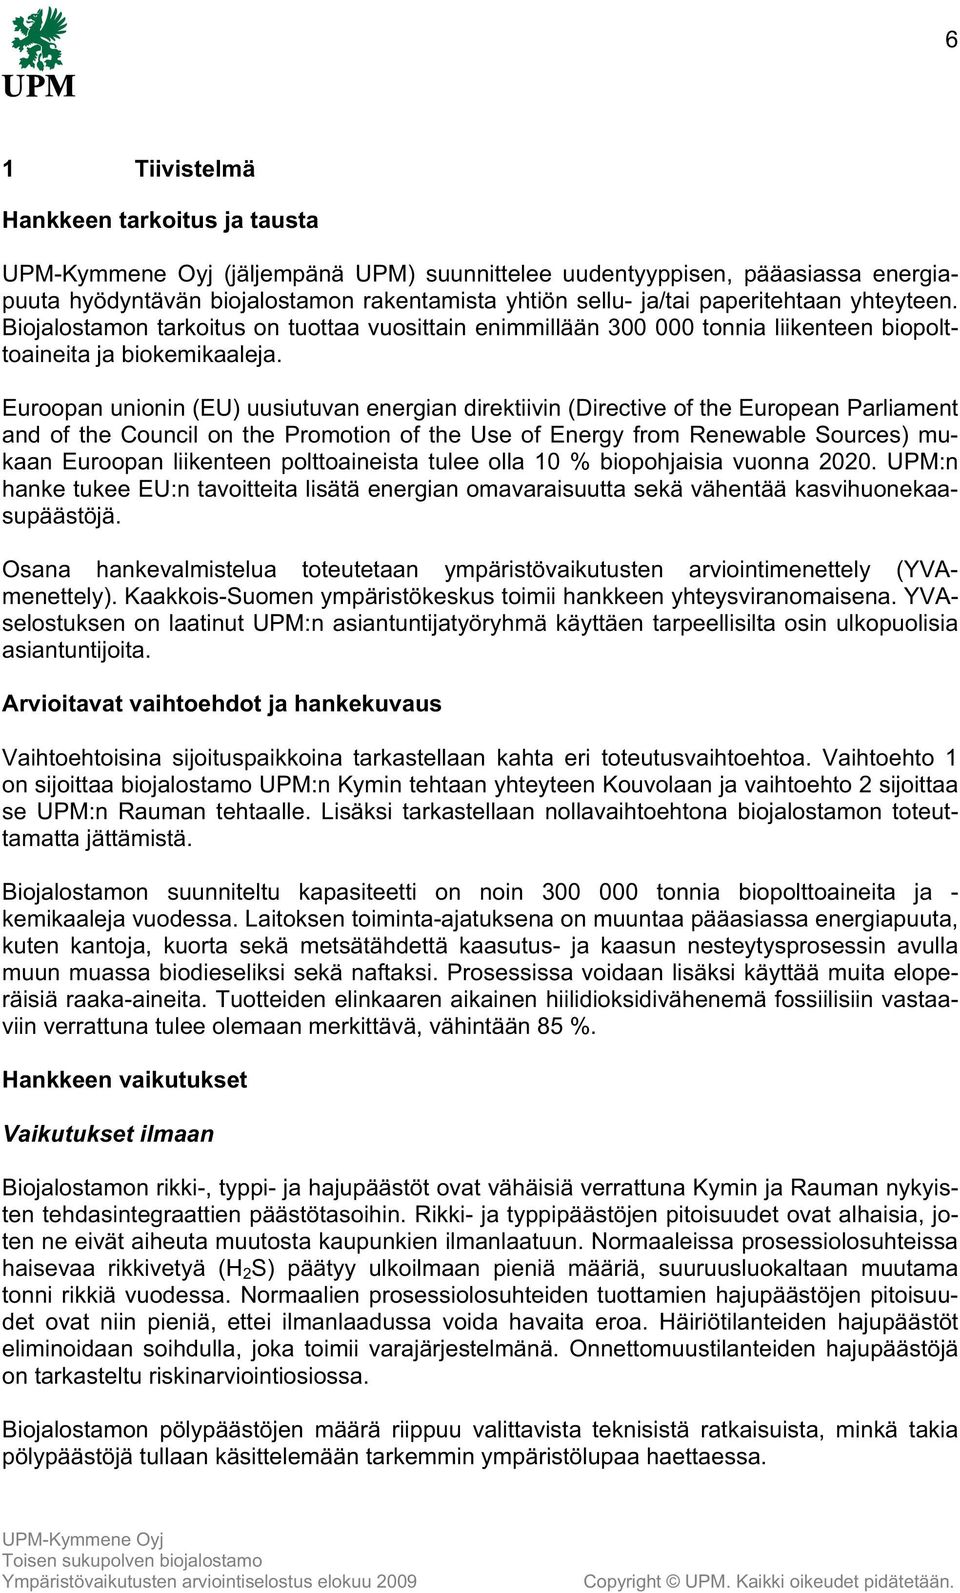 Euroopan unionin (EU) uusiutuvan energian direktiivin (Directive of the European Parliament and of the Council on the Promotion of the Use of Energy from Renewable Sources) mukaan Euroopan liikenteen